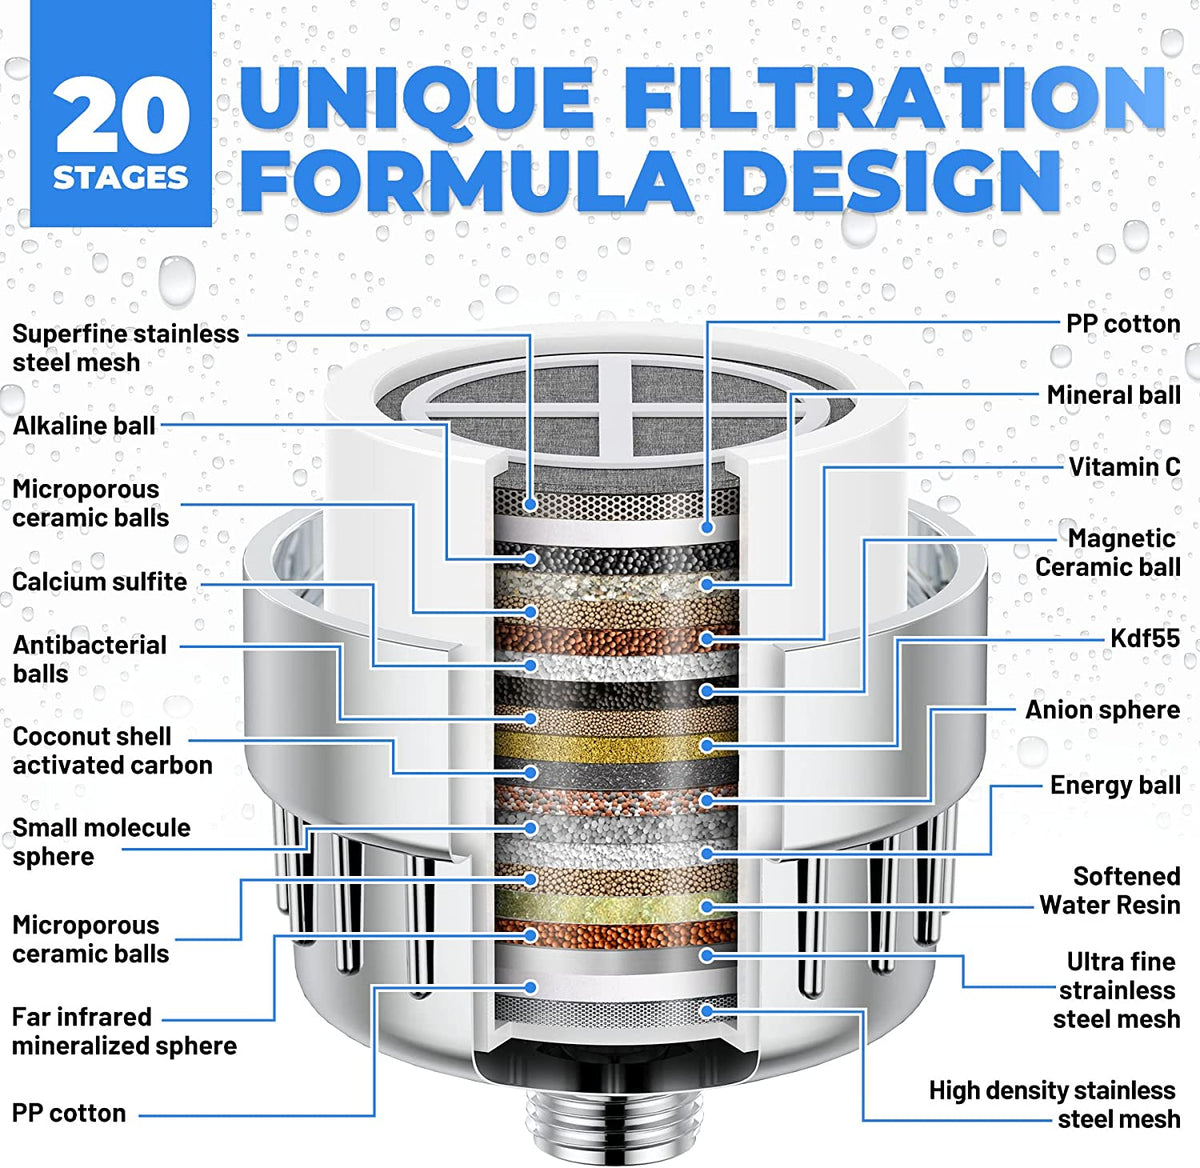 20 Stage Shower Filter Water Purifier